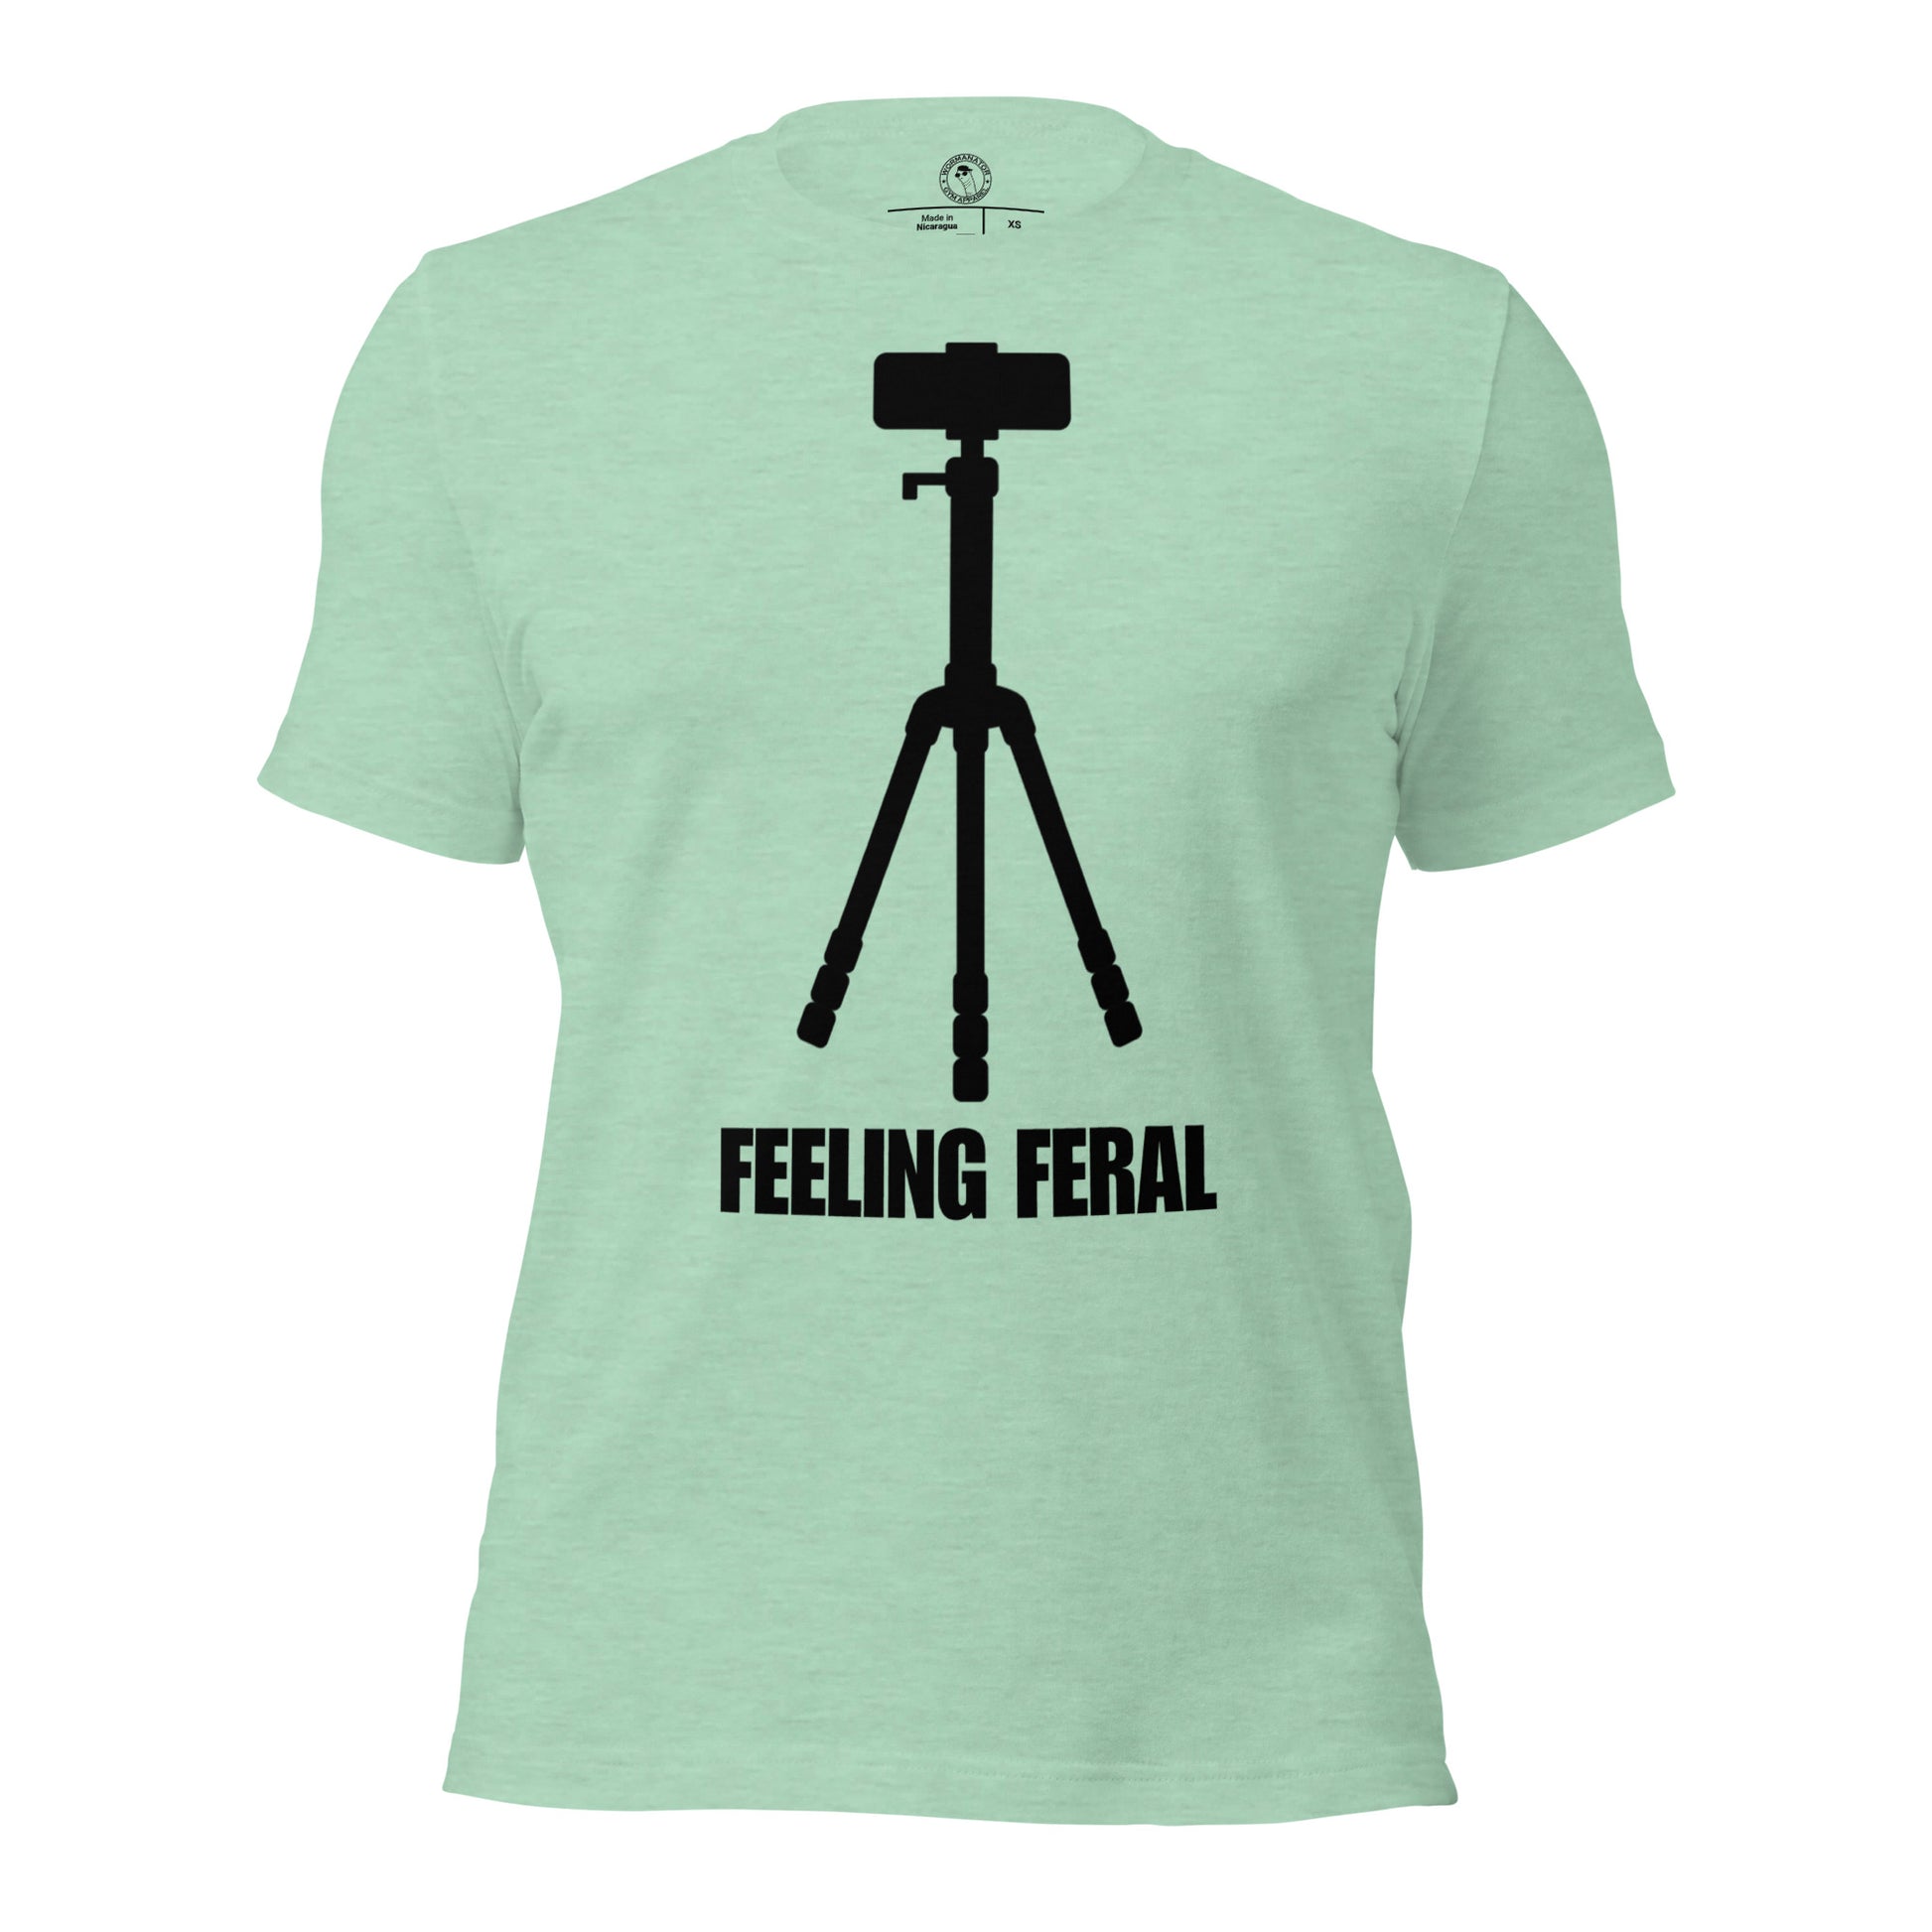 Feeling Feral Gym Shirt in Heather Prism Mint